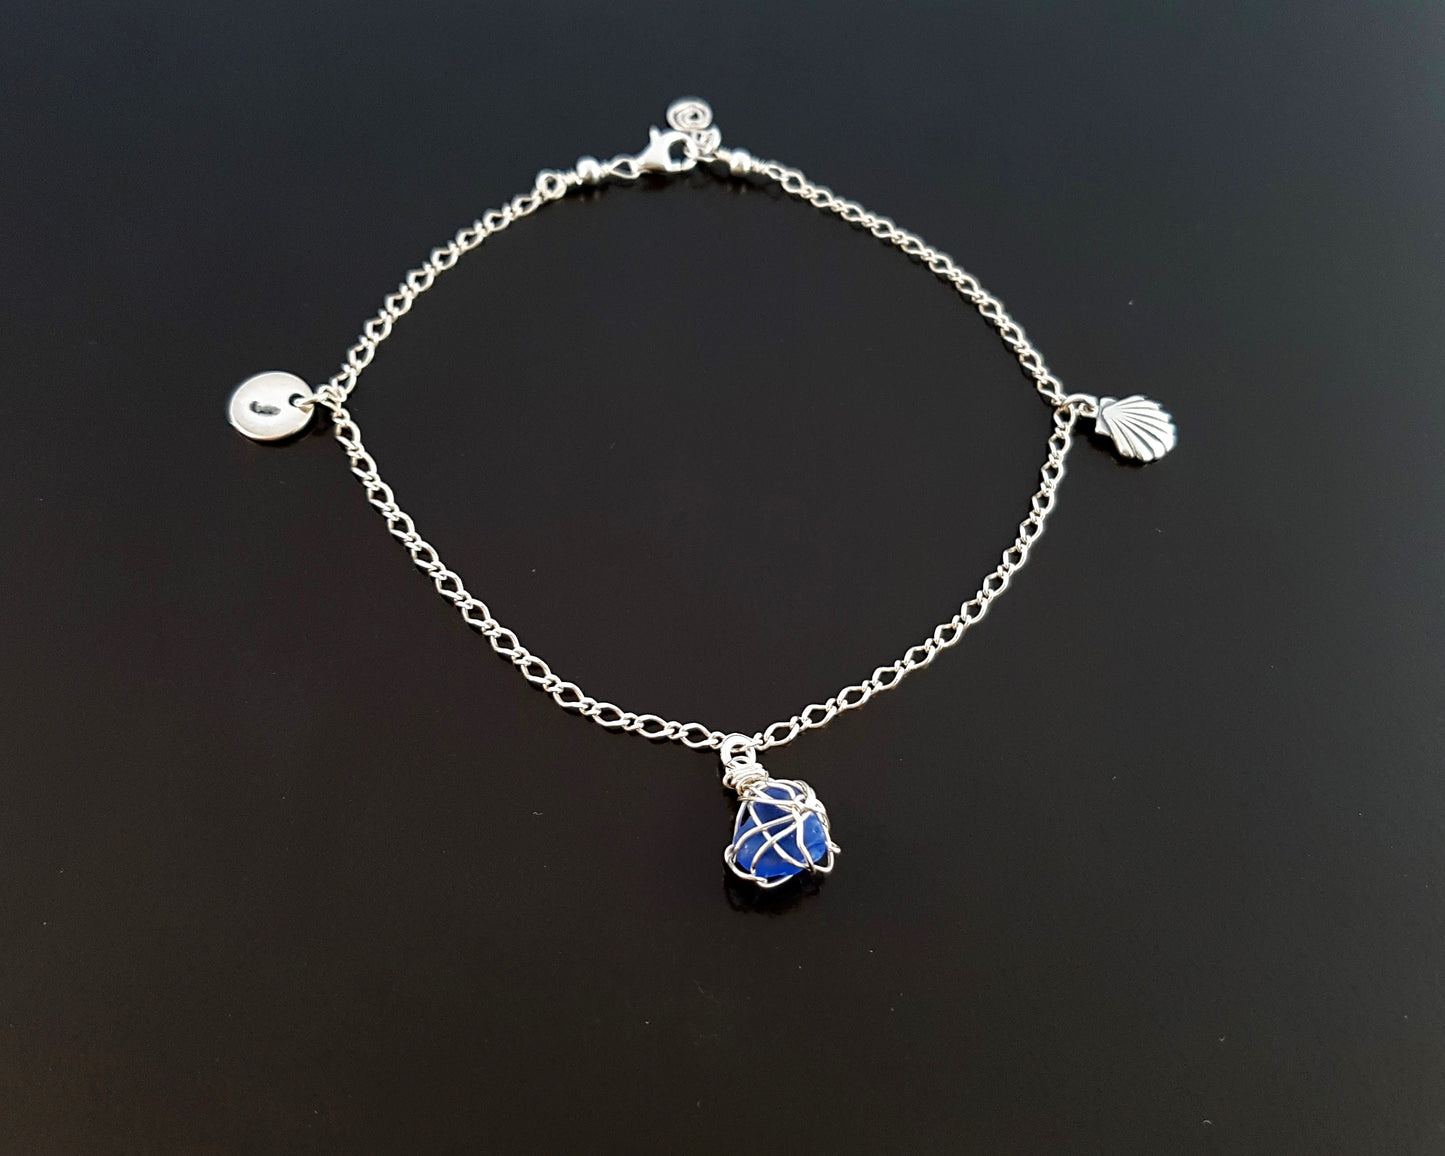 Blue Beach Glass, Sea Shell, Infinity, Initial Ankle Bracelet-Anklet-Sterling Silver, Lake Ontario Glass